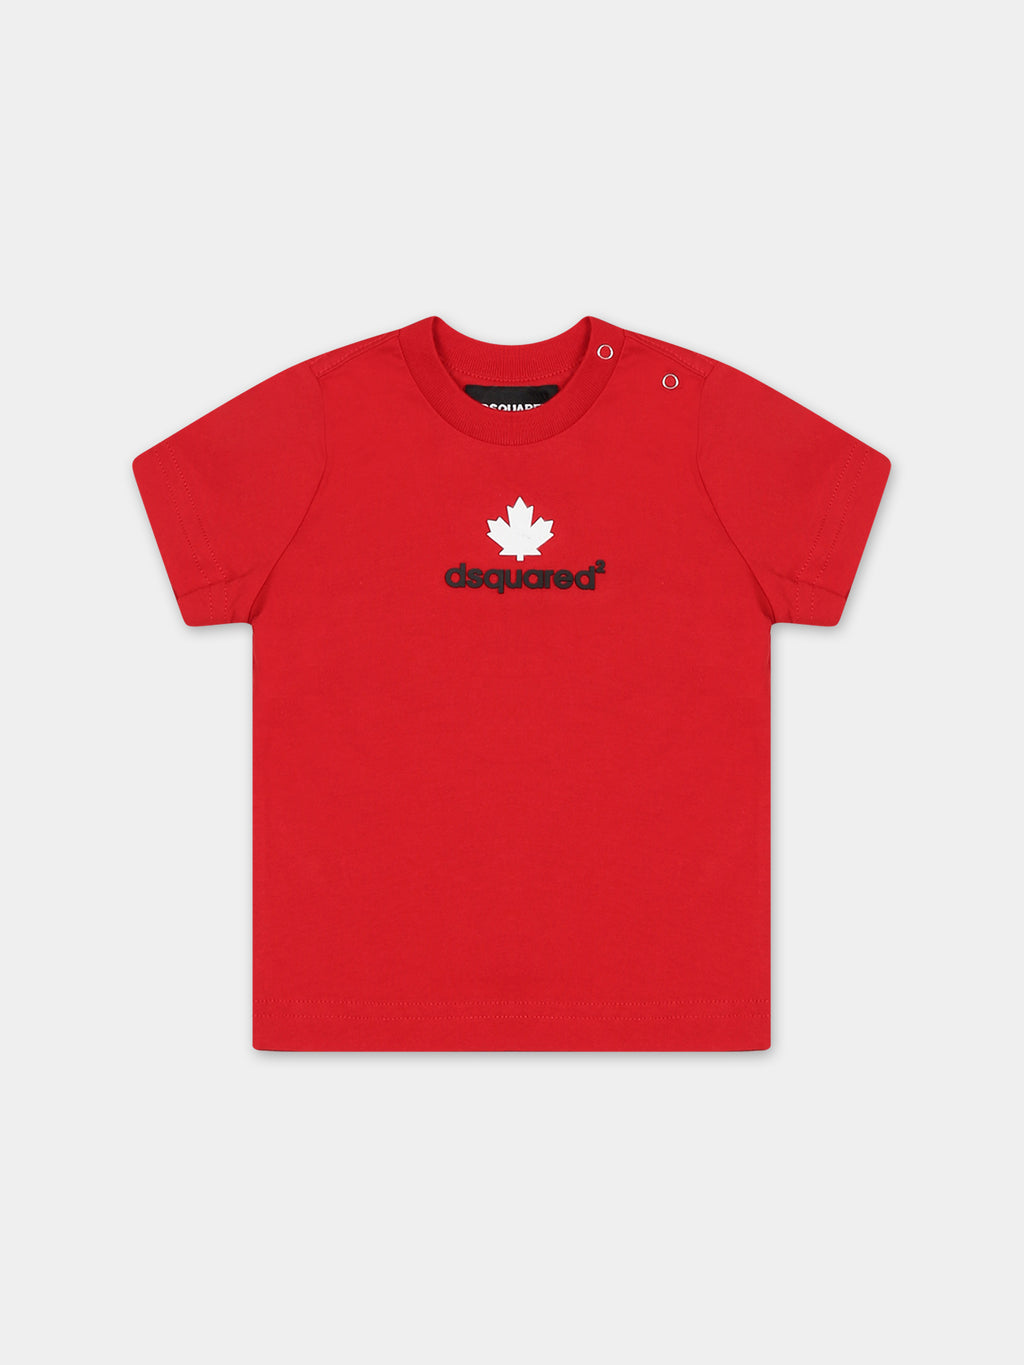 Red t-shirt for baby kids with logo